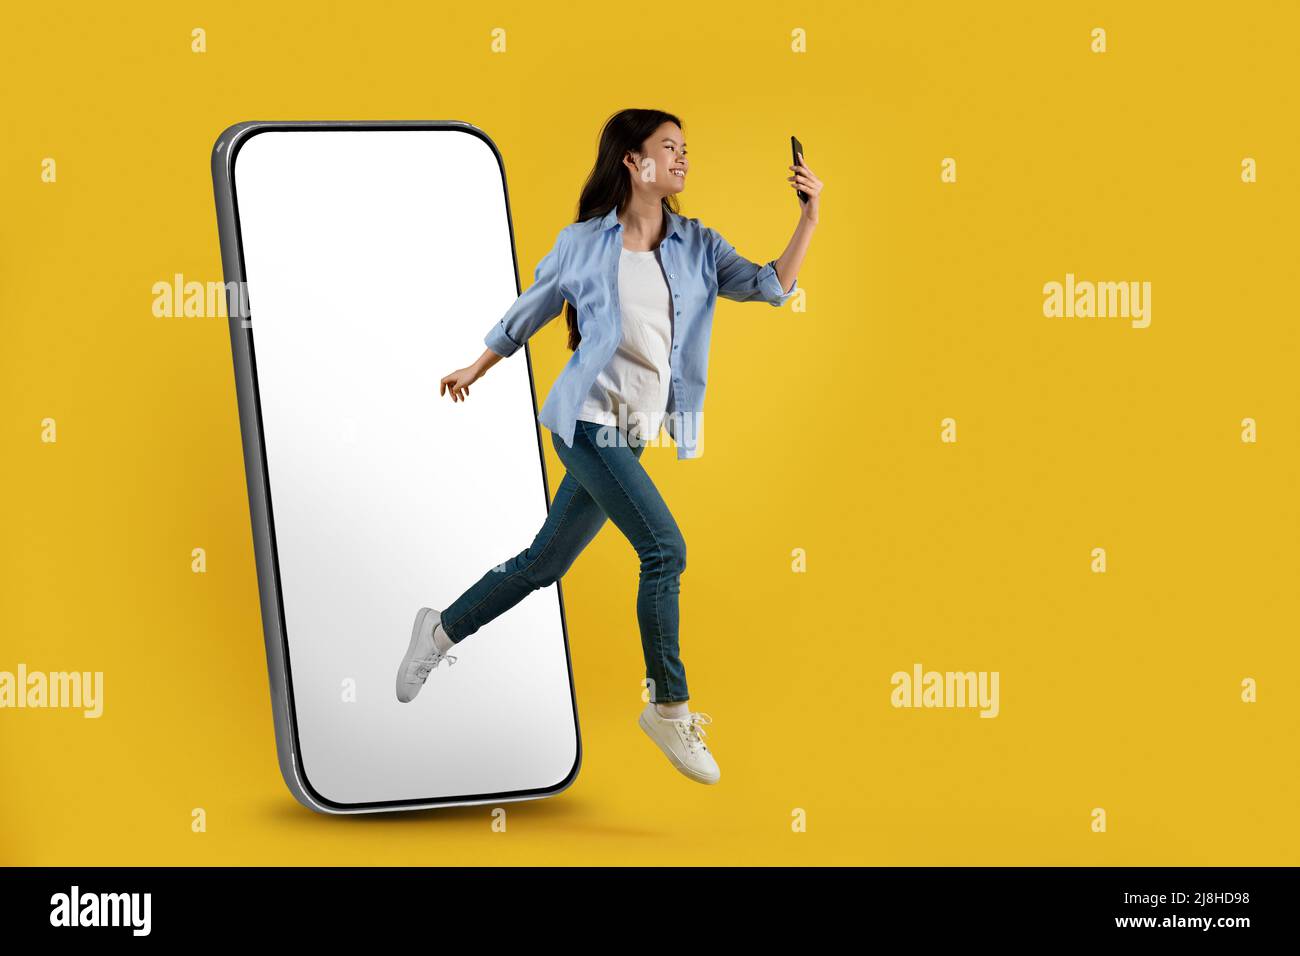 Satisfied young asian lady jumping off huge phone with blank screen froze in air and look at smartphone Stock Photo